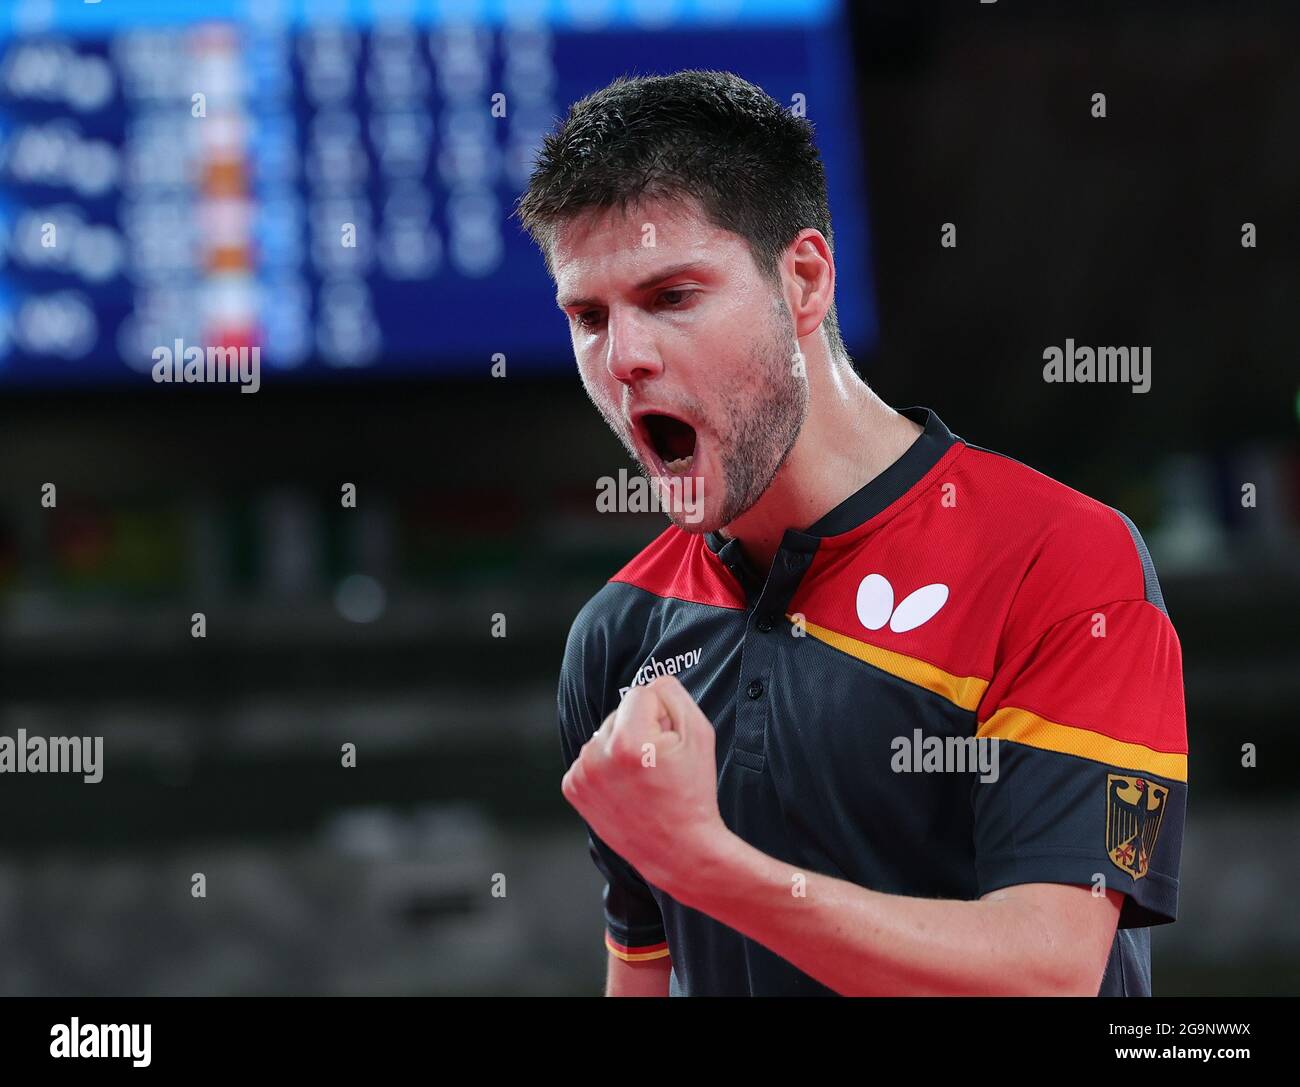 Tokyo, Japan. 27th July, 2021. Dimitrij Ovtcharov of Germany celebrates after scoring during the table tennis men's singles round of 16 match against Koki Niwa of Japan at the Tokyo 2020 Olympic Games in Tokyo, Japan, July 27, 2021. Credit: Wang Dongzhen/Xinhua/Alamy Live News Stock Photo